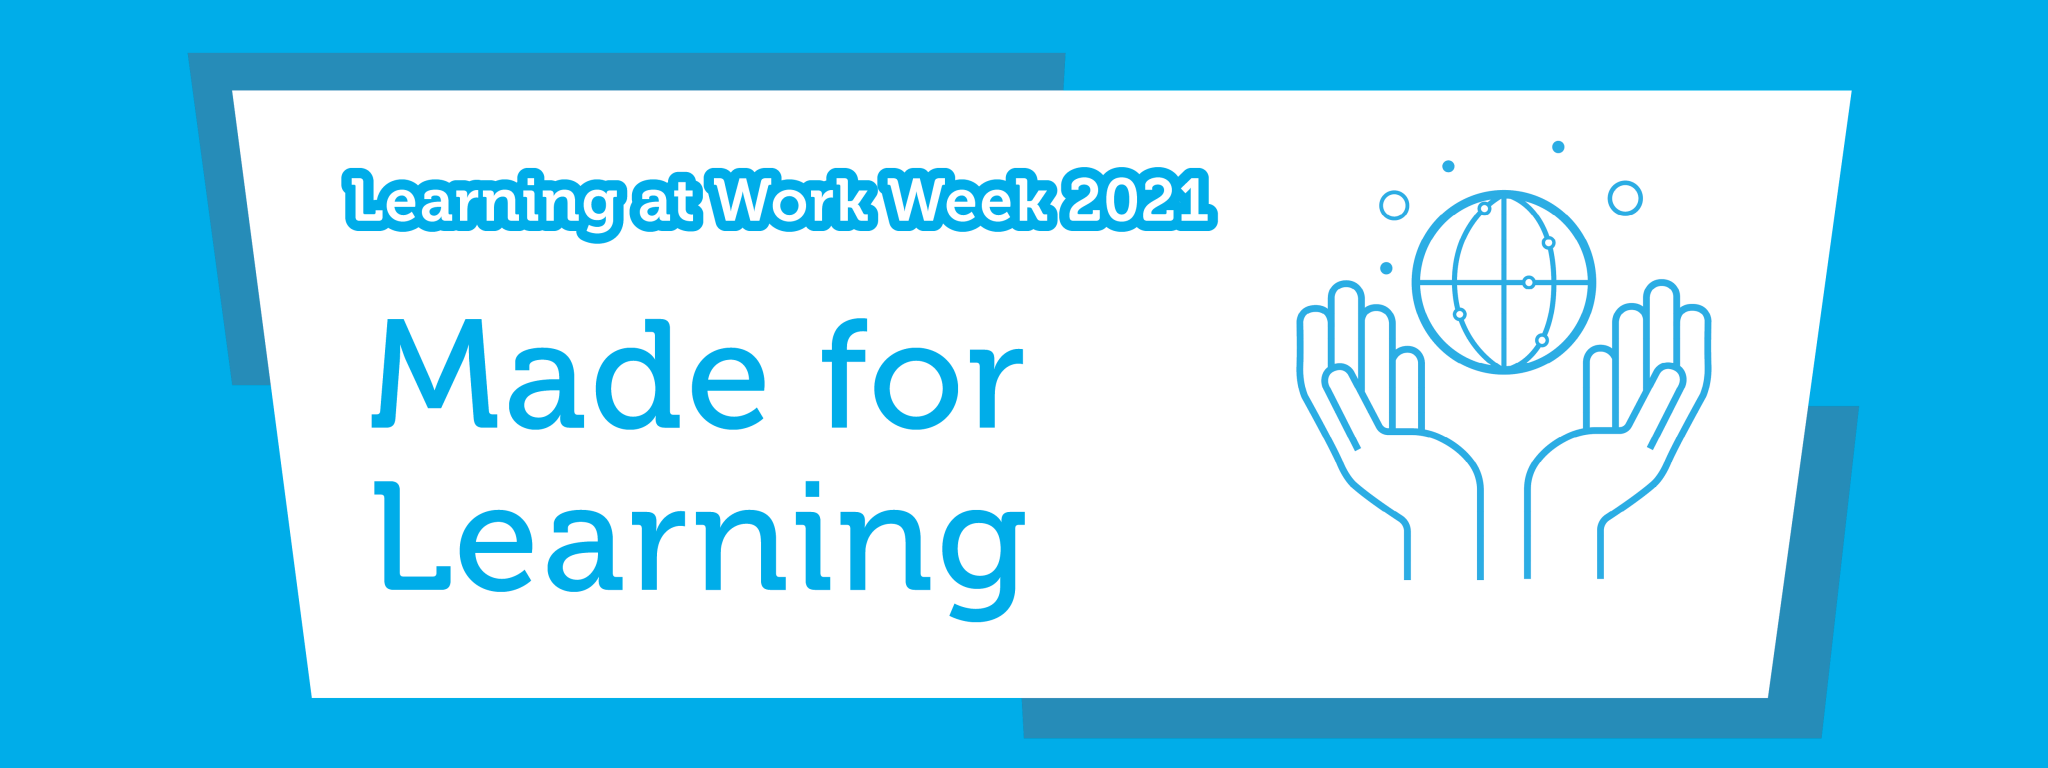 Learning at Work Week 2021: Made for Learning banner